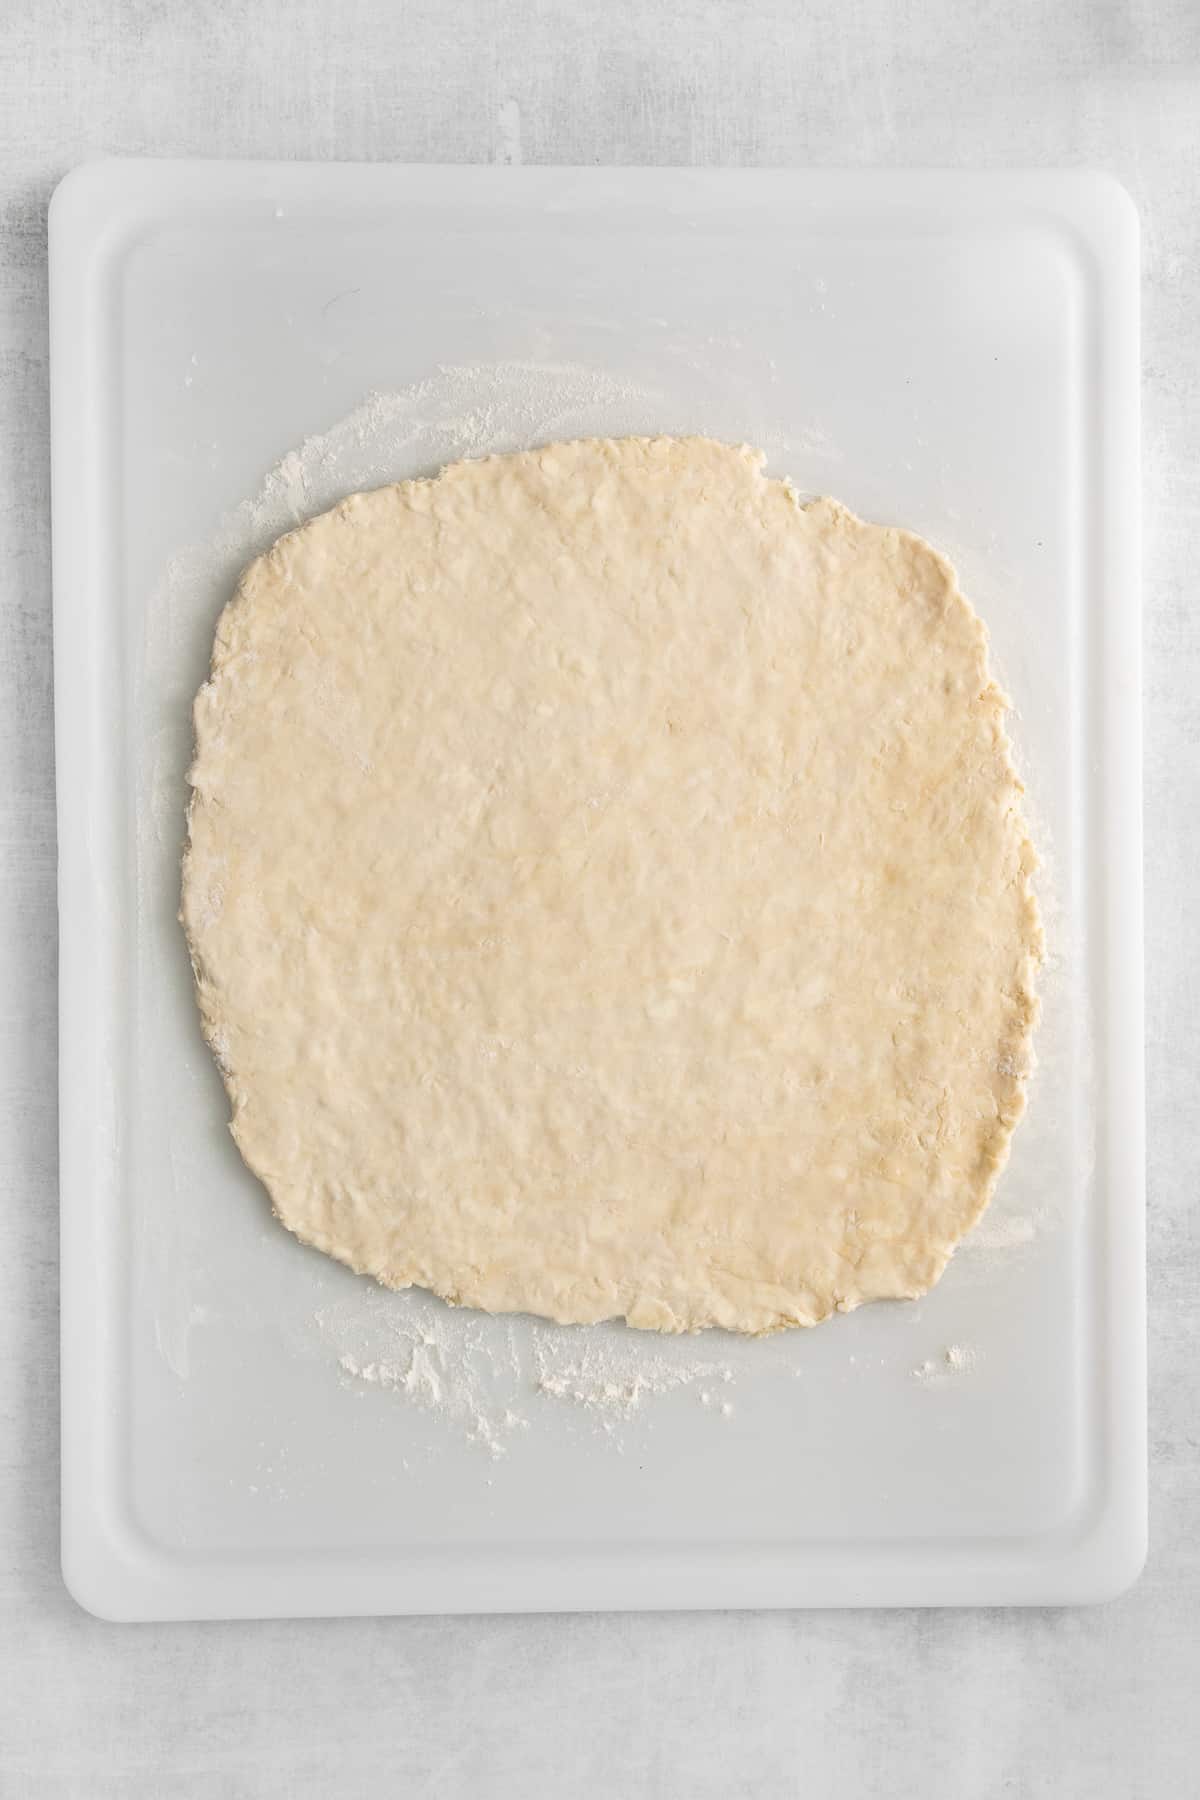 Homemade puff pastry dough rolled out on a cutting board.